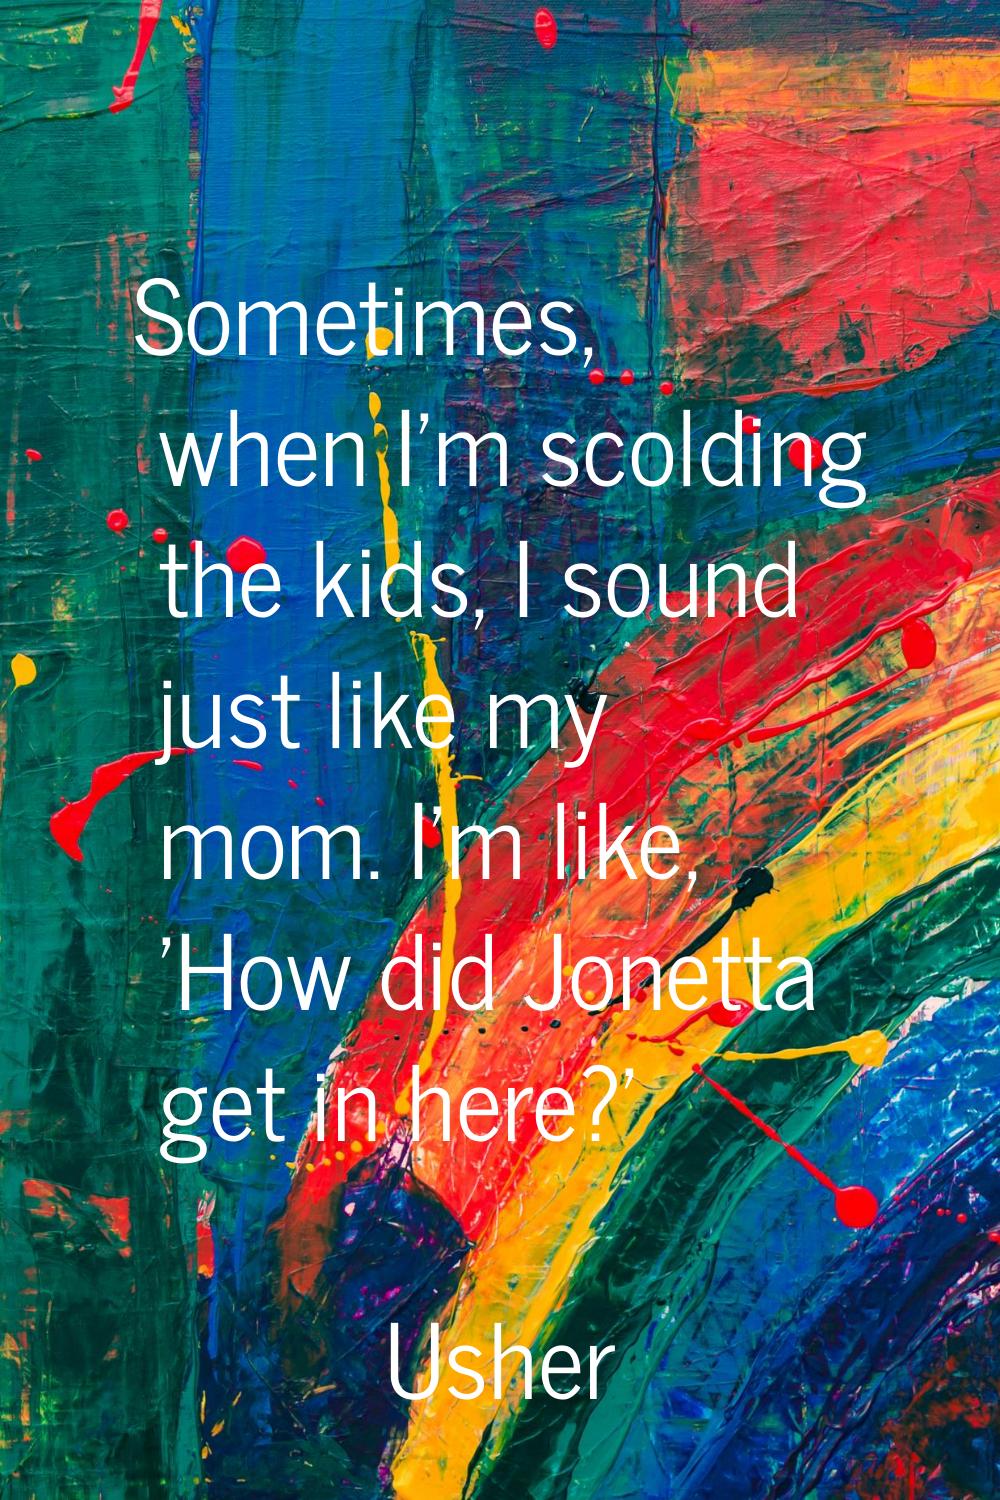 Sometimes, when I'm scolding the kids, I sound just like my mom. I'm like, 'How did Jonetta get in 